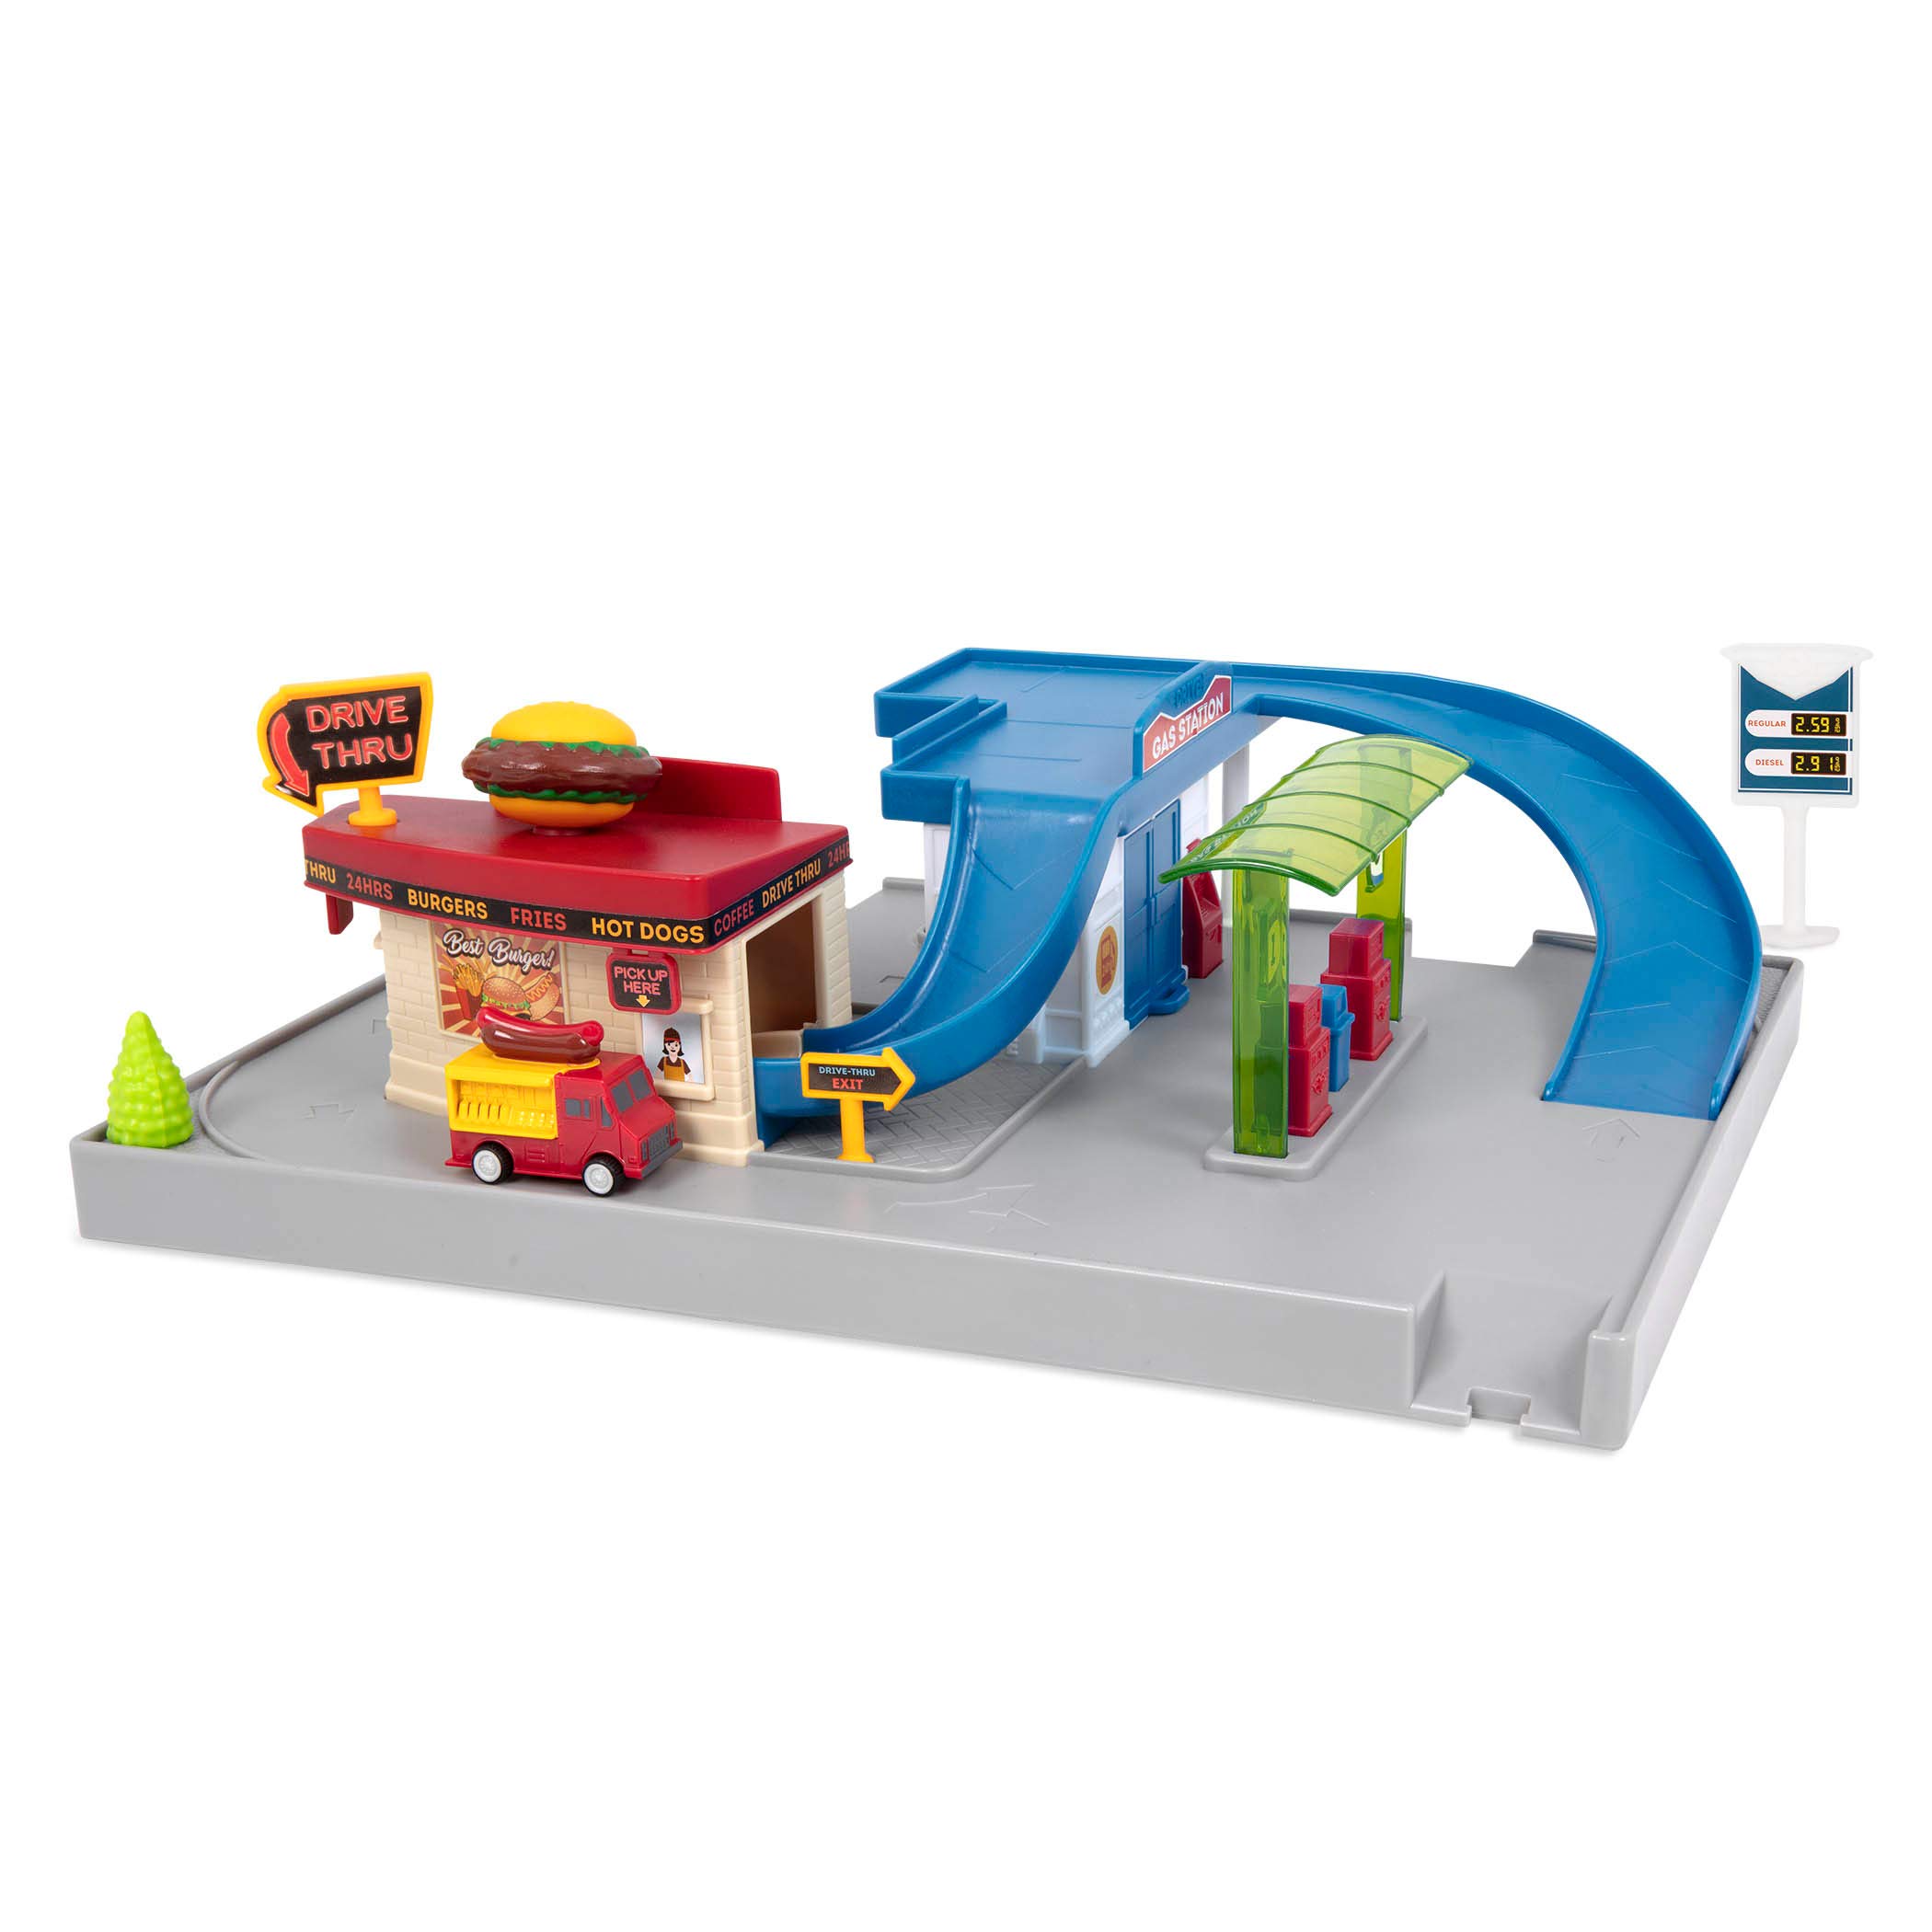 Driven by Battat – Gas Station & Drive-Thru Restaurant Playset – Toy Car Accessories for Kids – 5-Piece Set with Toy Food Truck – Toy Car Playset – 3 Years + – Pocket Dine & Drive Pit Stop (5pc)